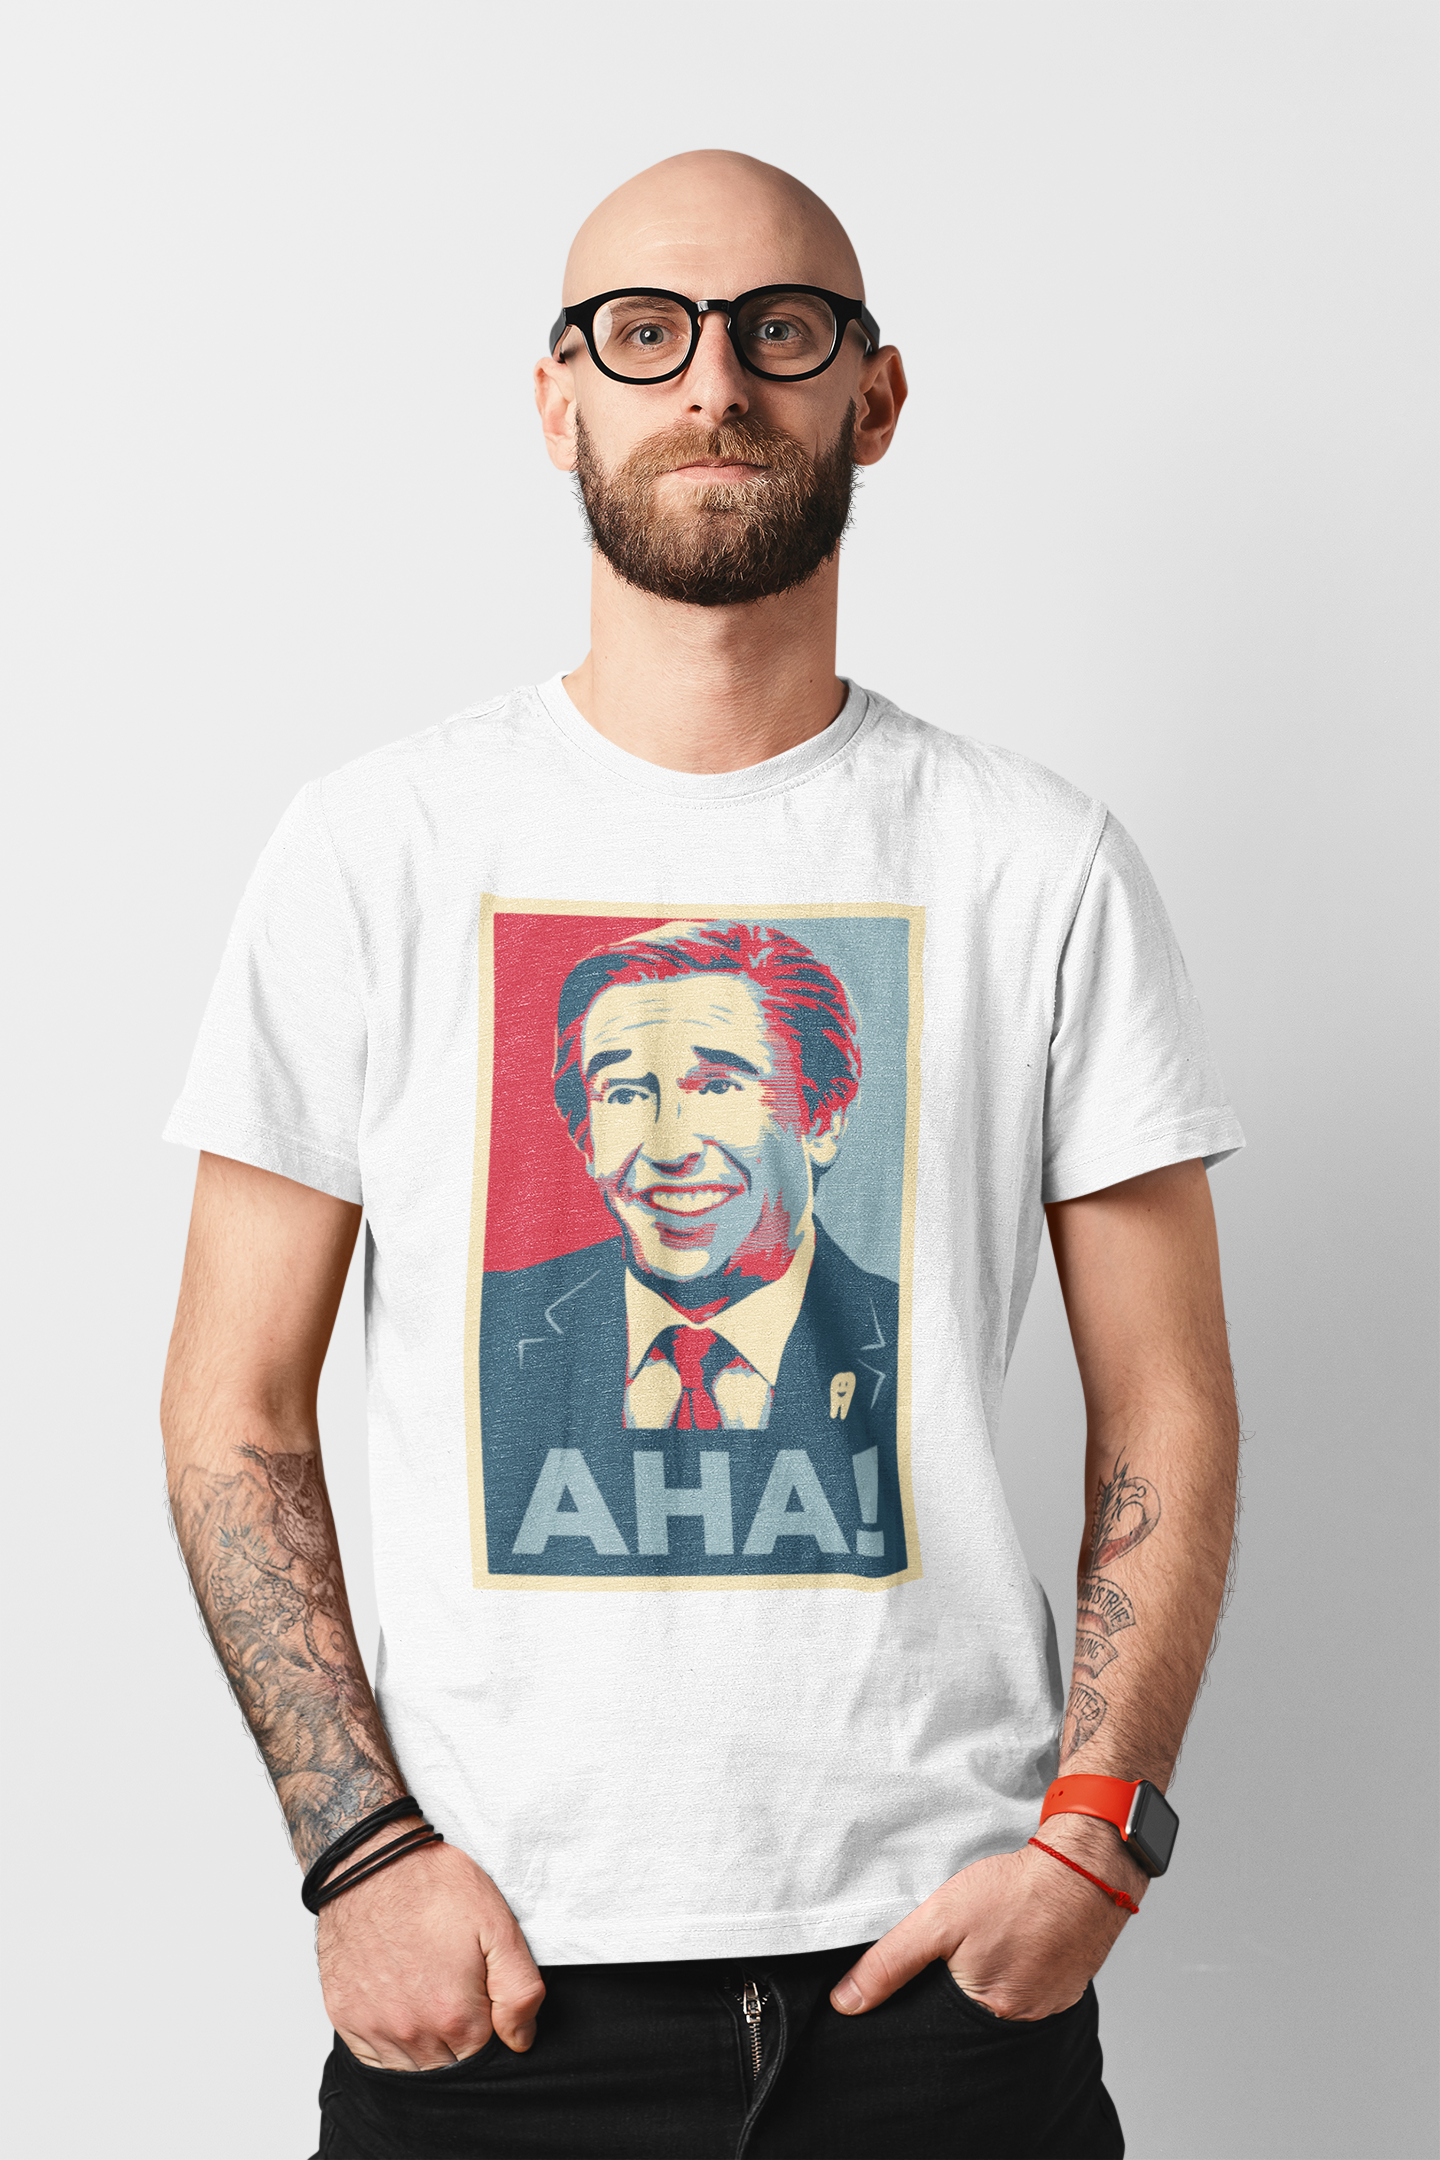 Alan Partridge "AHA" T Shirt - Funny British Comedy TV Show Tee for Fans - Iconic Catchphrase Shirt